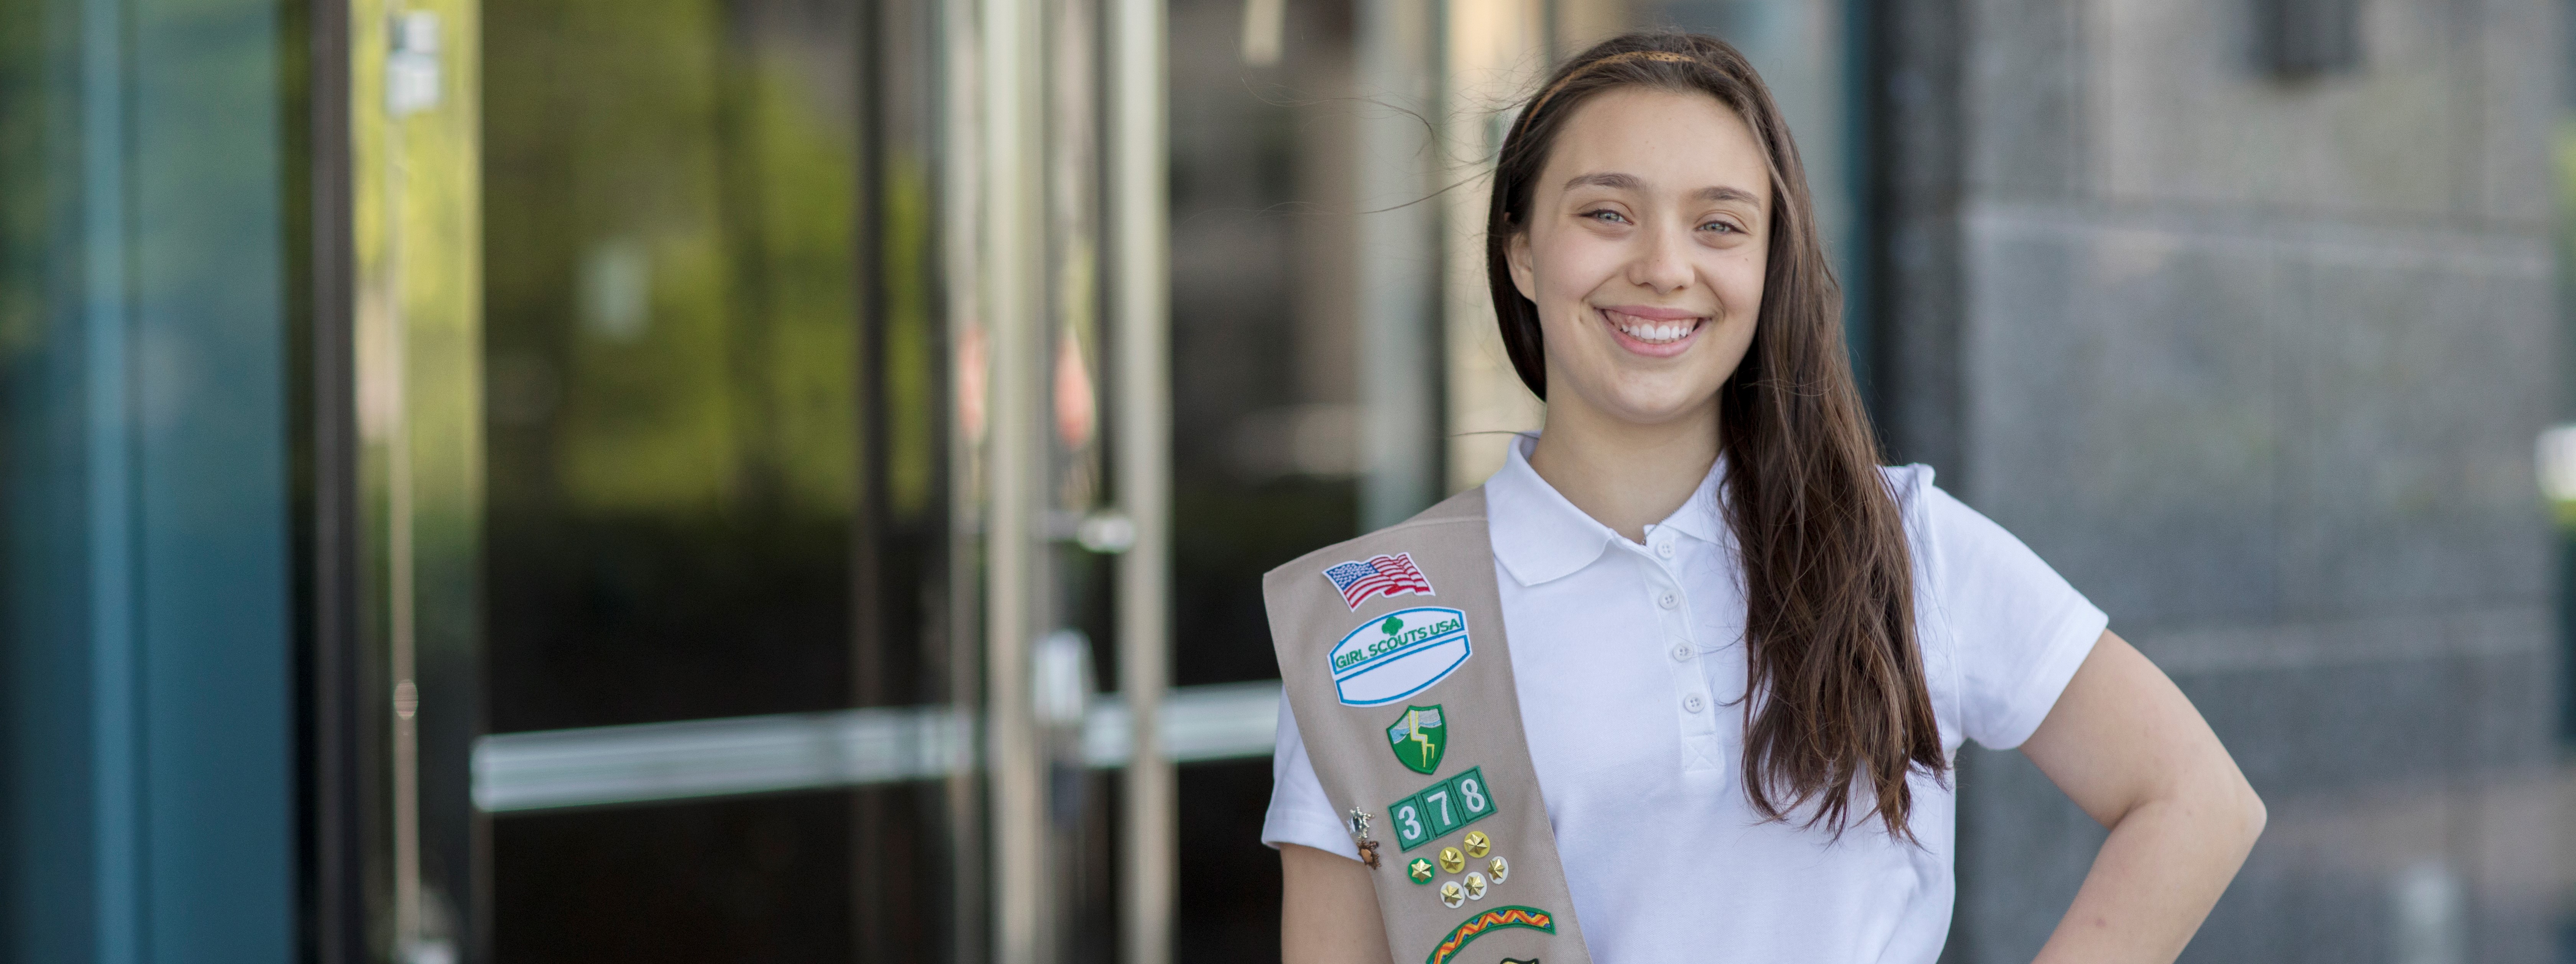 Juliette Girl Scout - Individually Registered Member